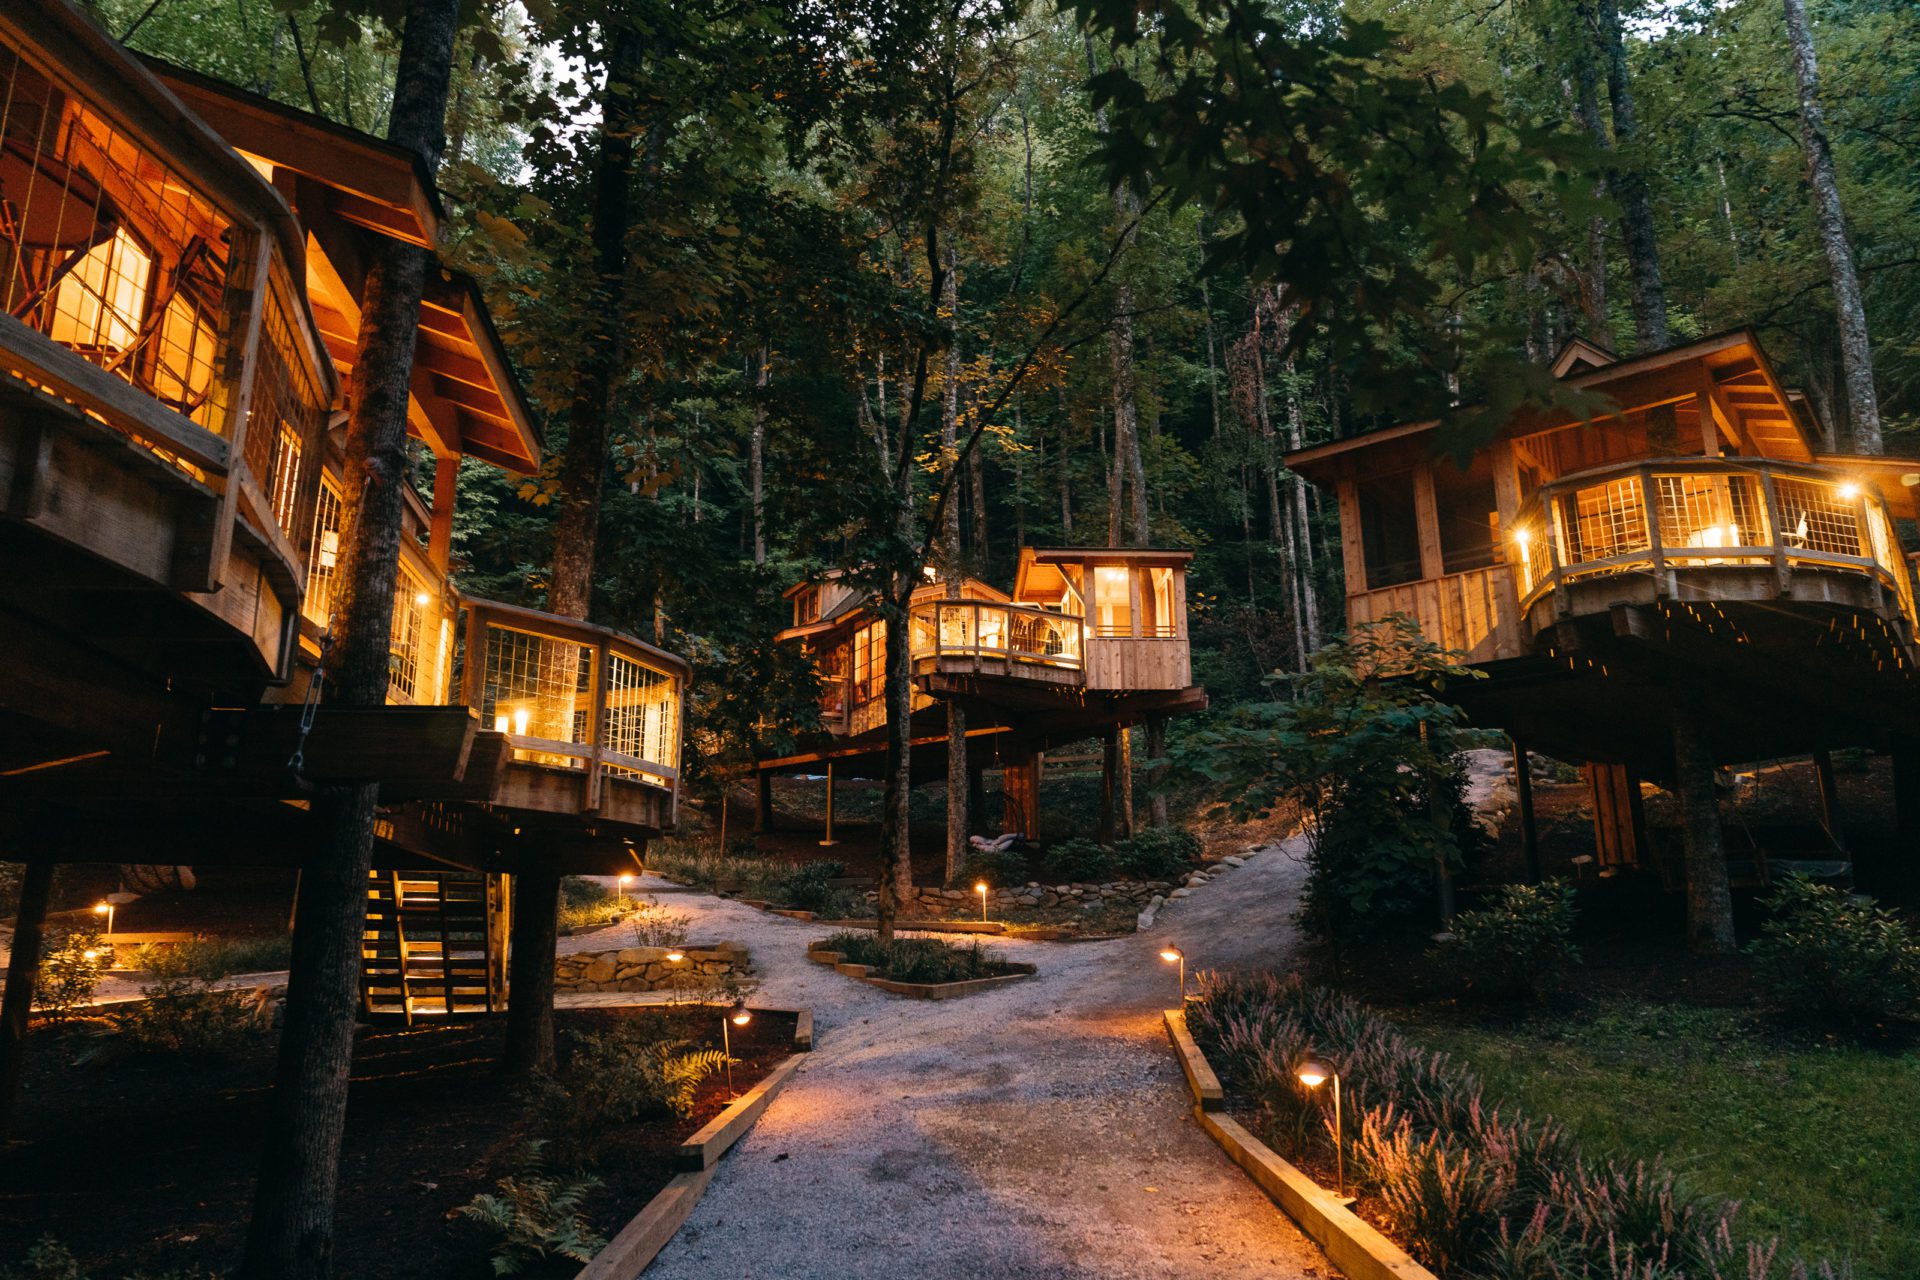 Treehouses lit up at night